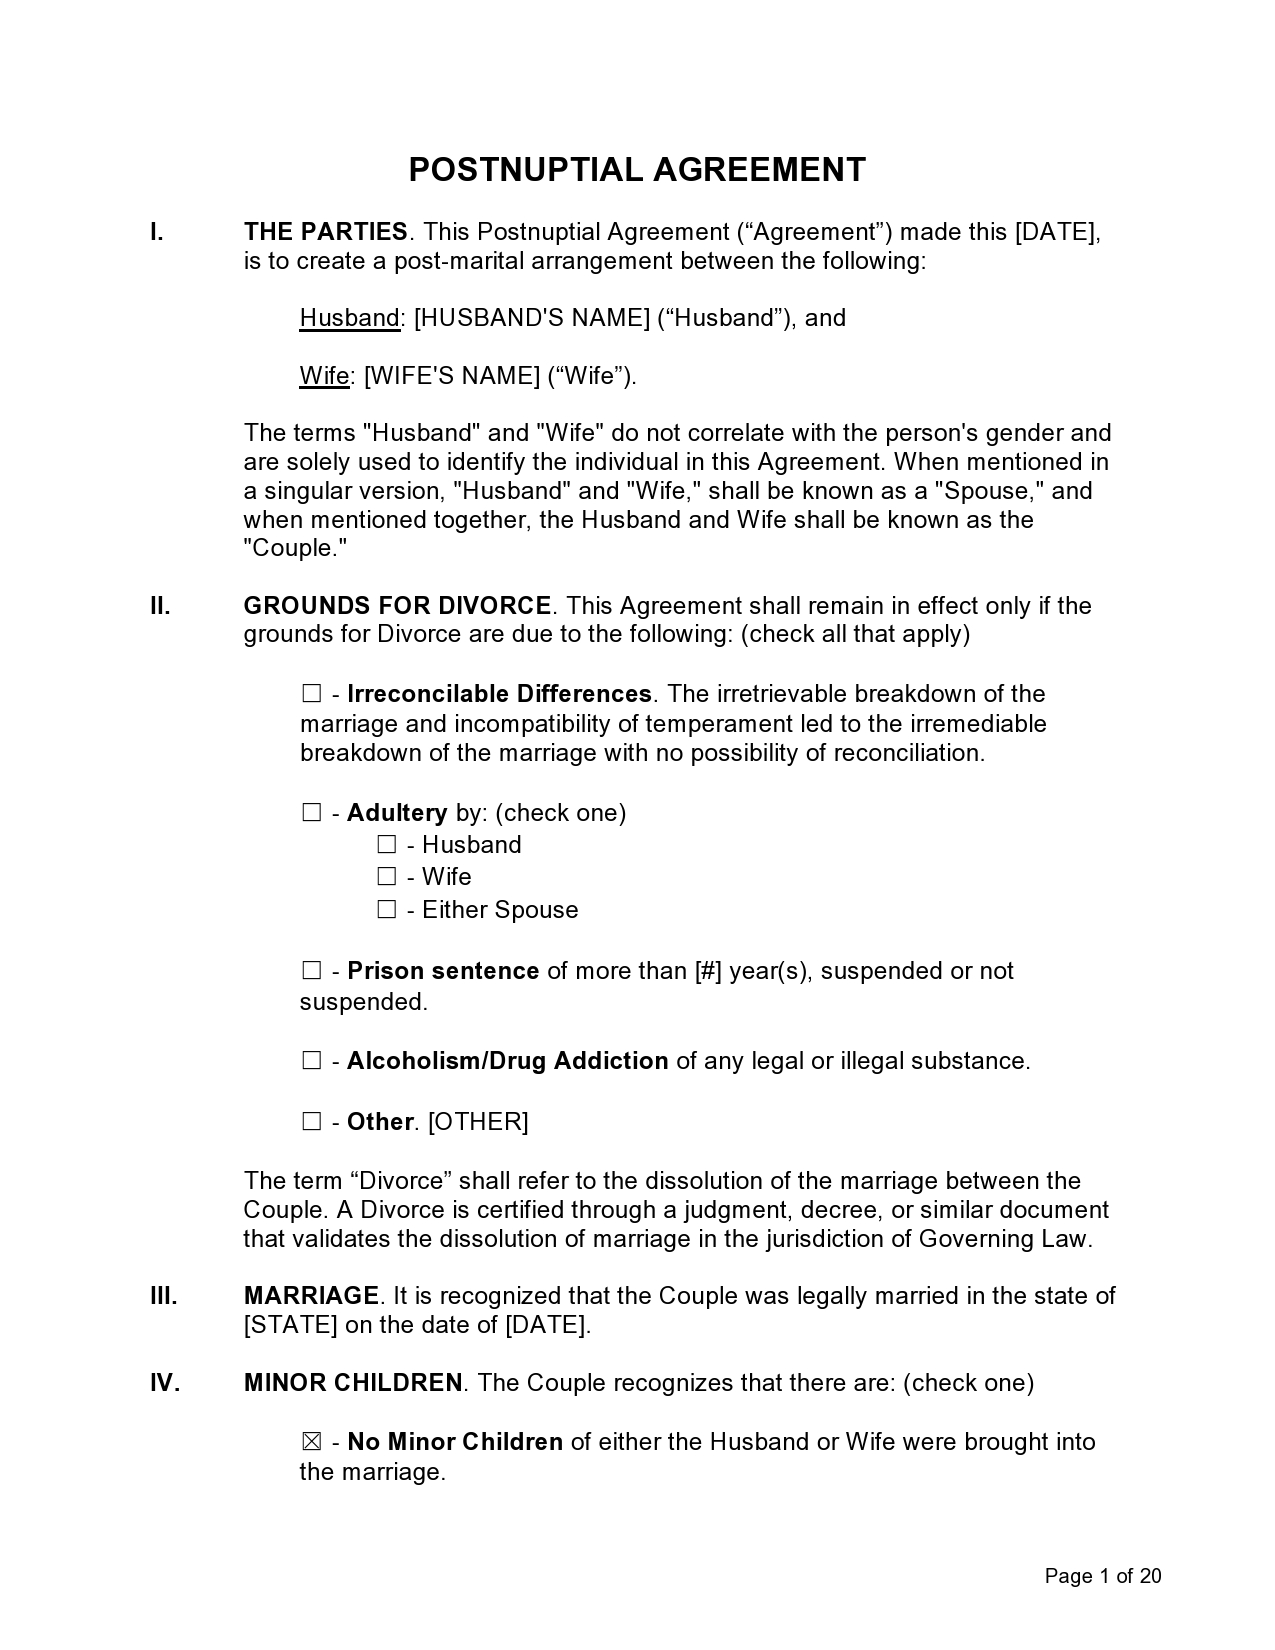 Free postnuptial agreement template 01